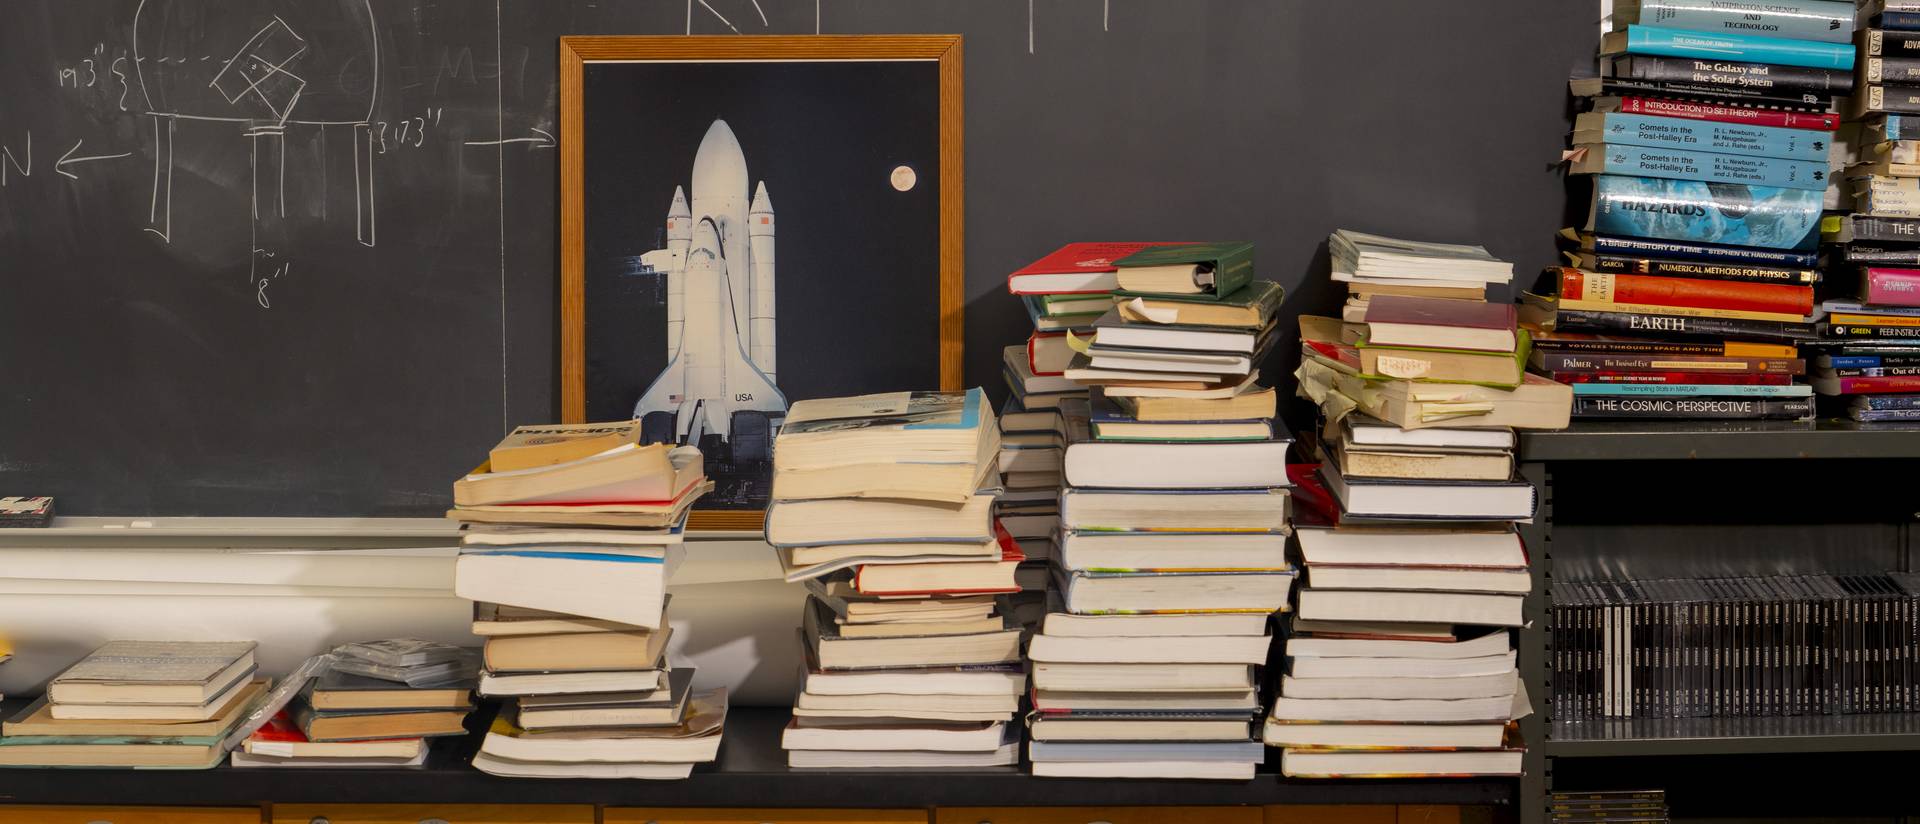 A stack of physics textbooks in front of a chalkboard and an image of a rocketship.